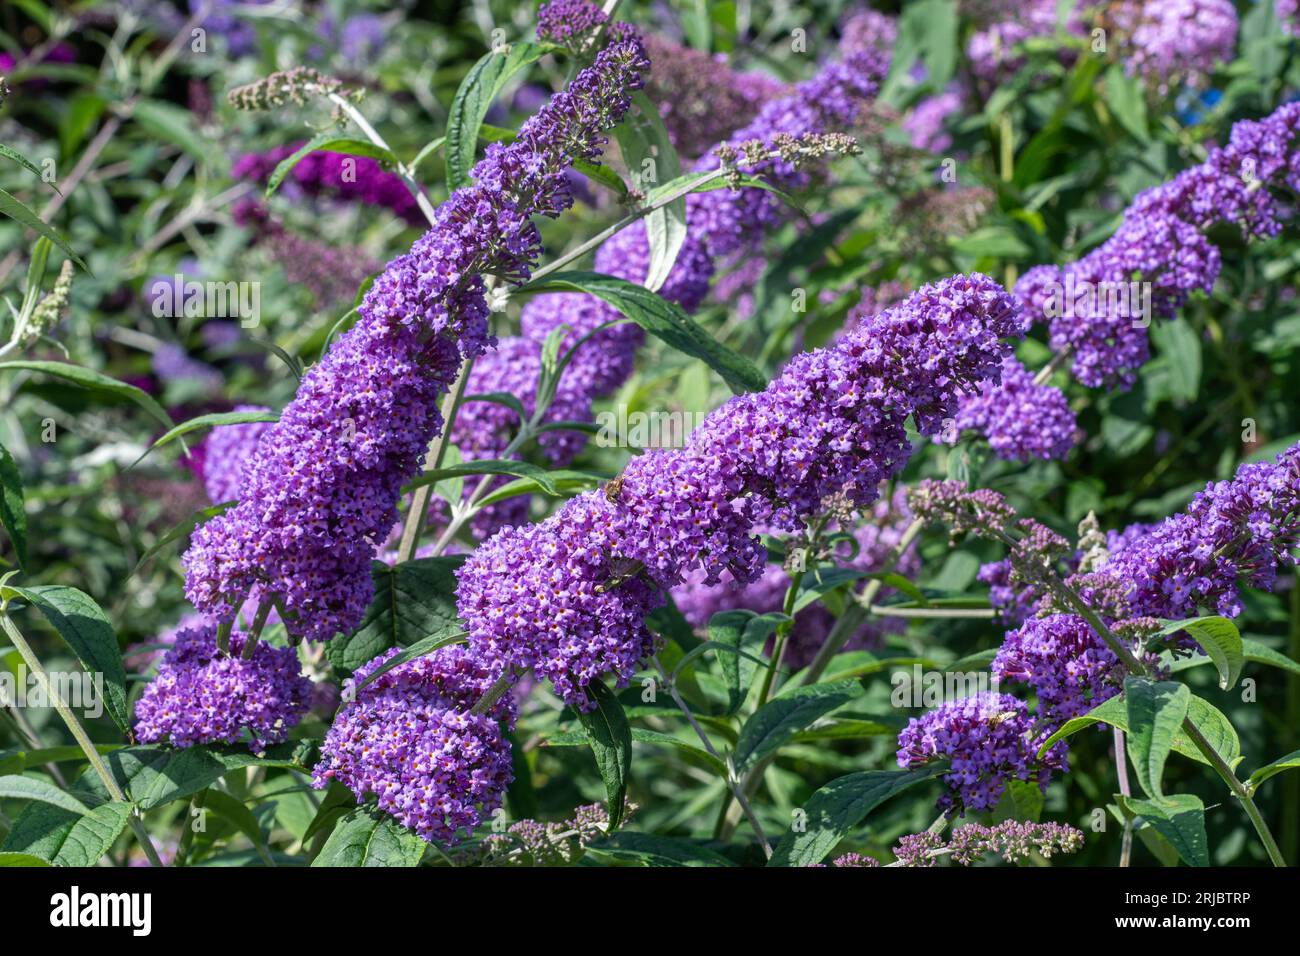 Buddleja davidii 'Orchid Beauty' (Buddleia variety) known as a butterfly bush, with mauve flowers in summer or August, England, UK Stock Photo